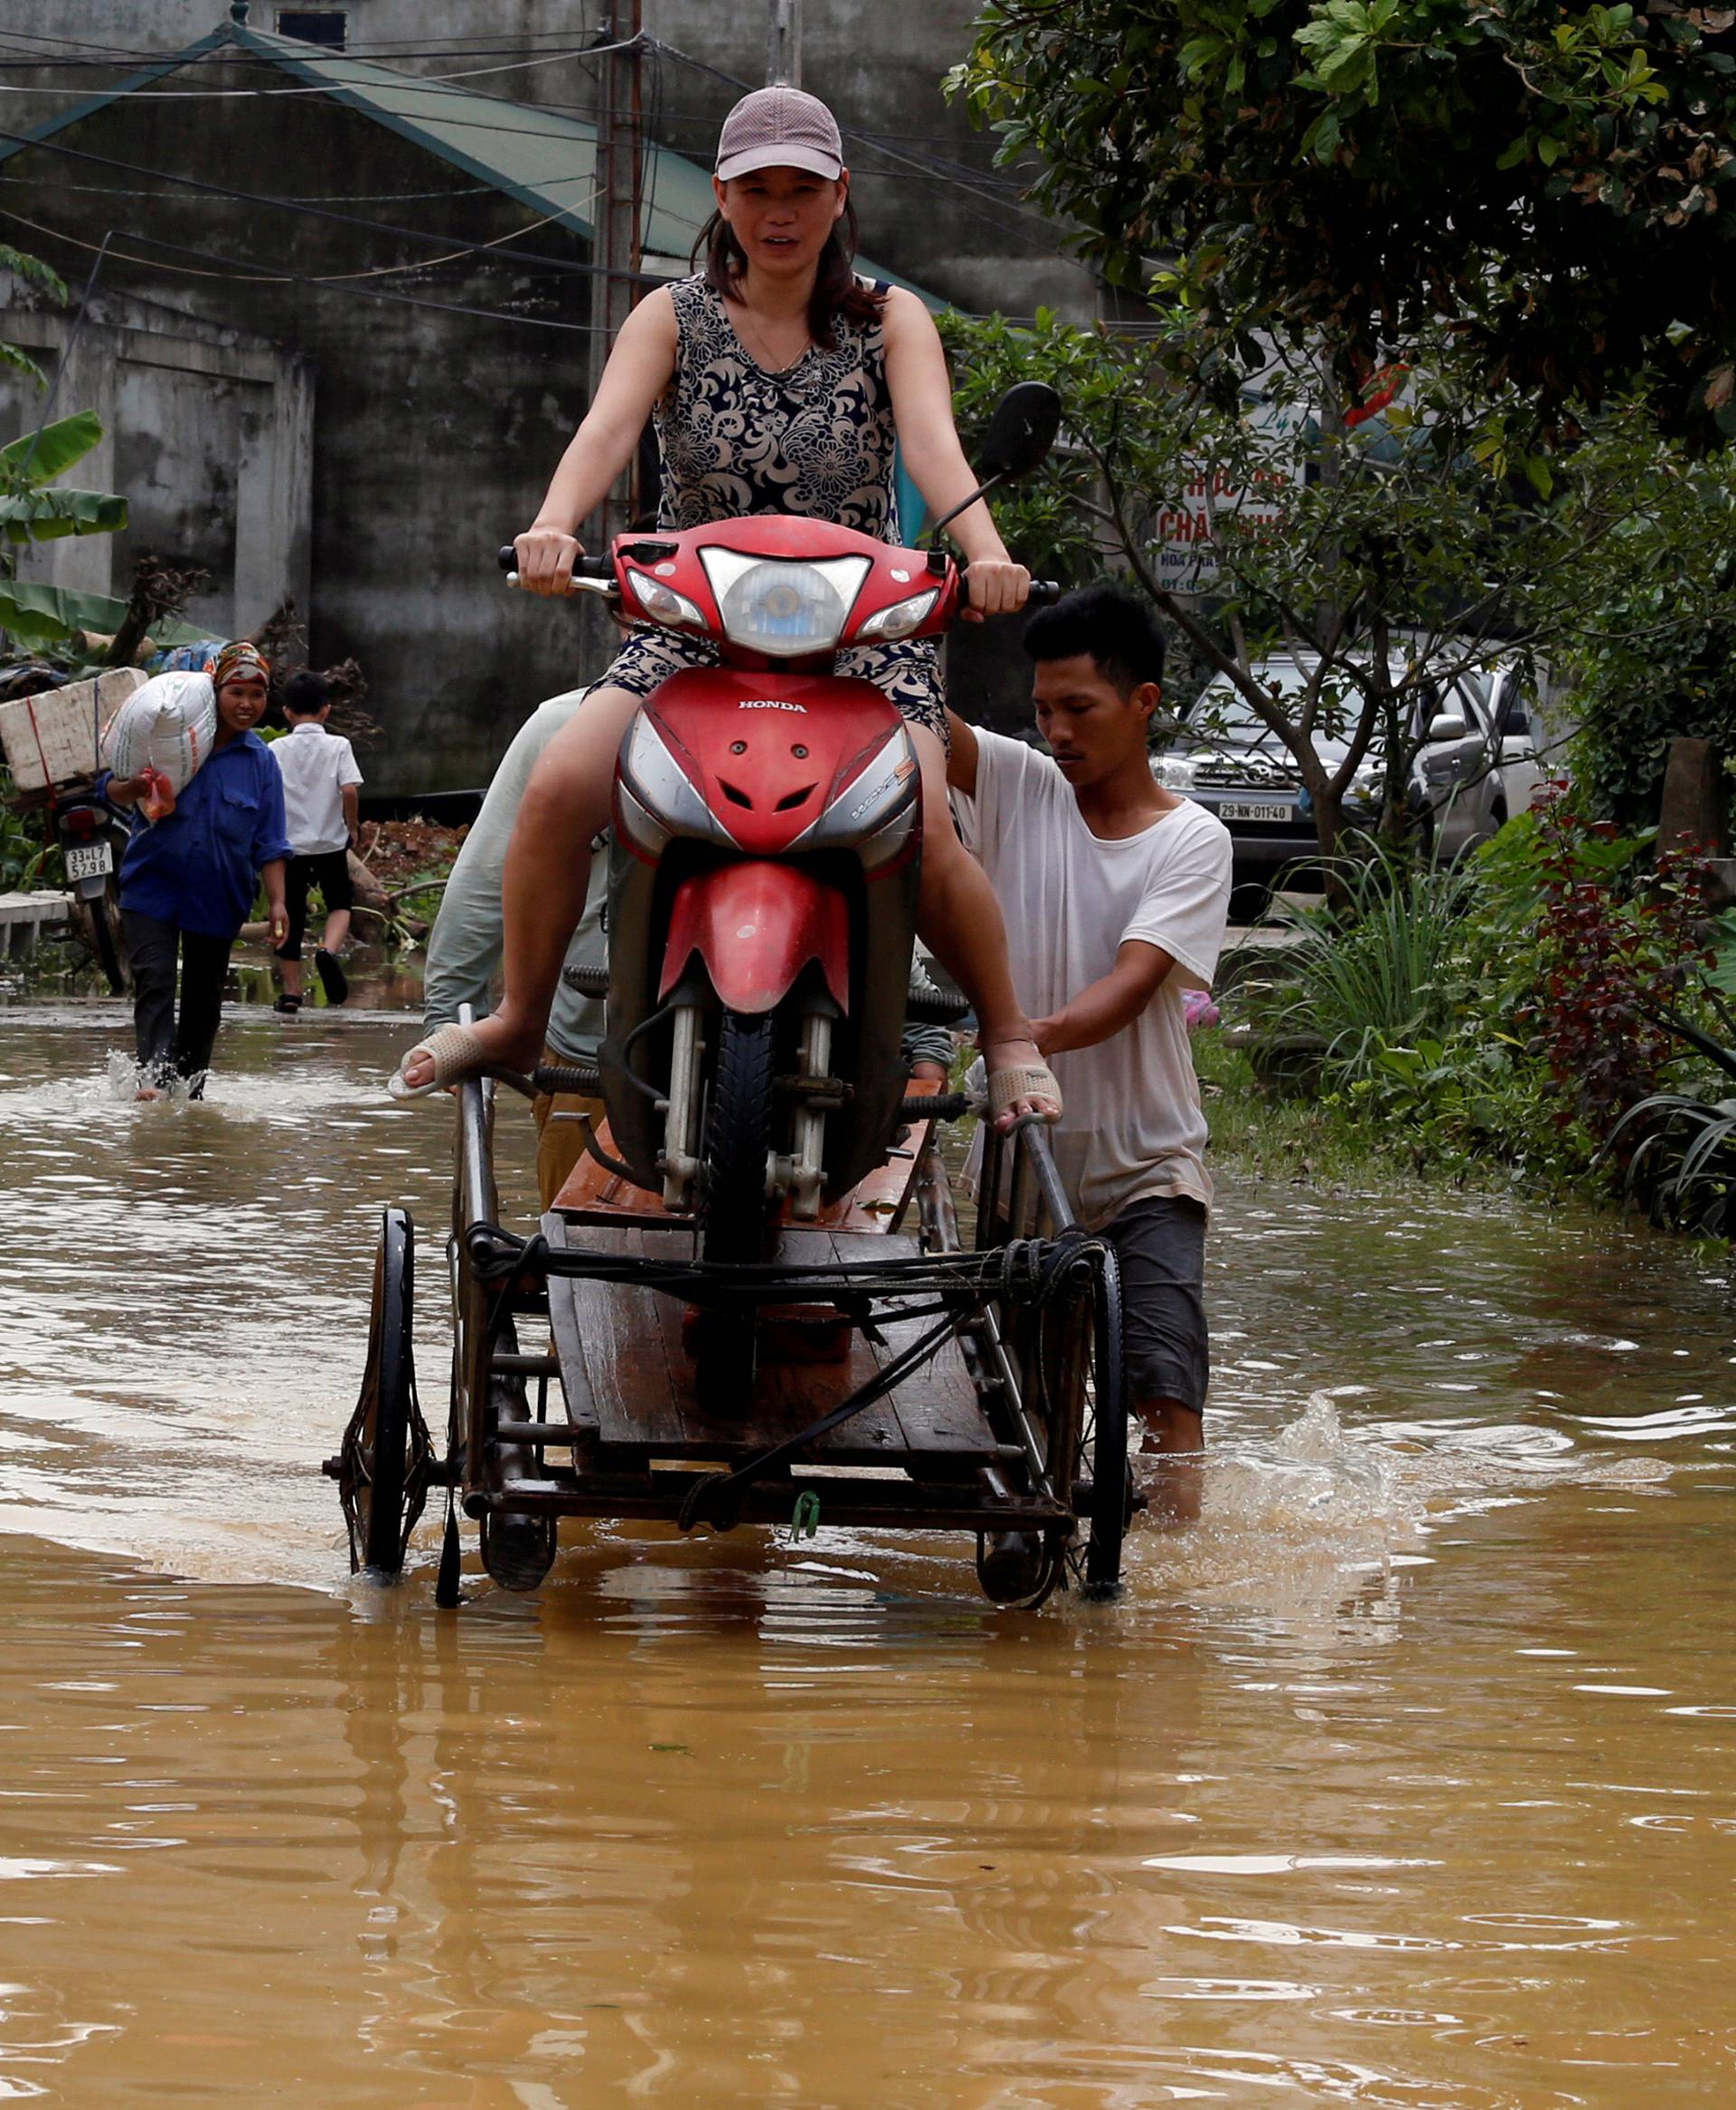 Men evacuate a woman through a flooded road after a tropical depression in Hanoi